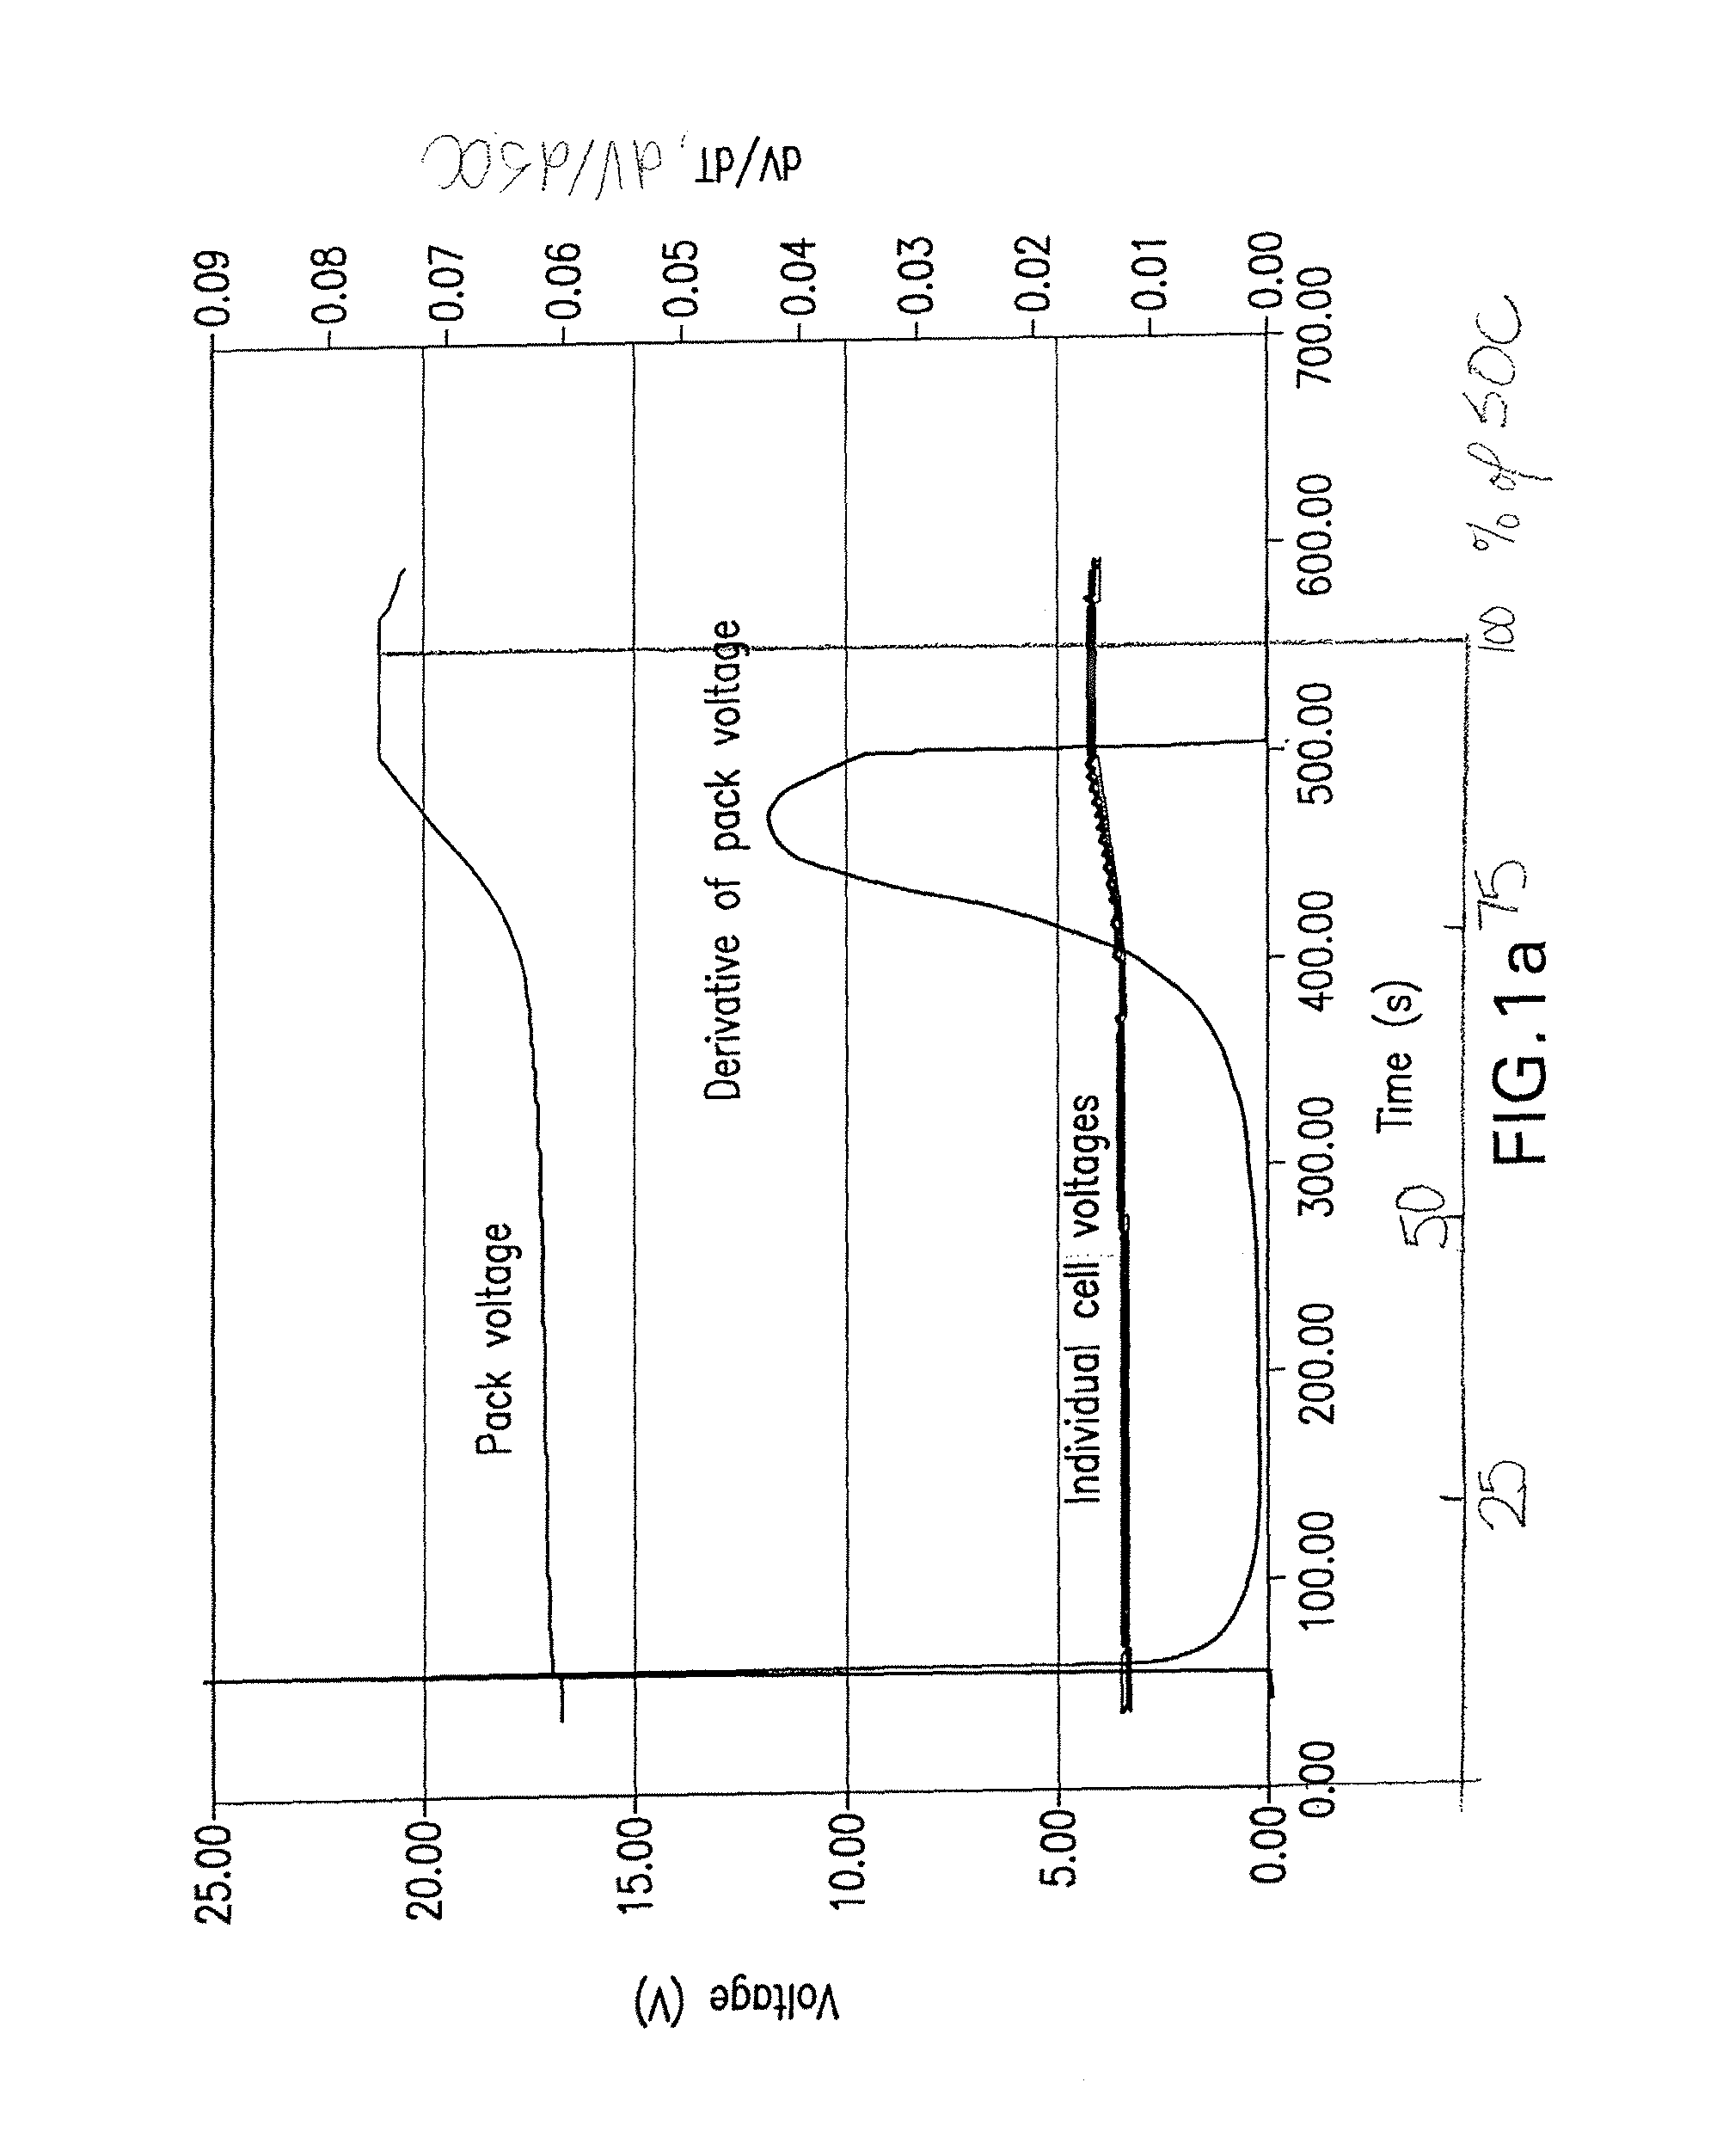 Method for detecting cell state-of-charge and state-of-discharge divergence of a series string of batteries or capacitors